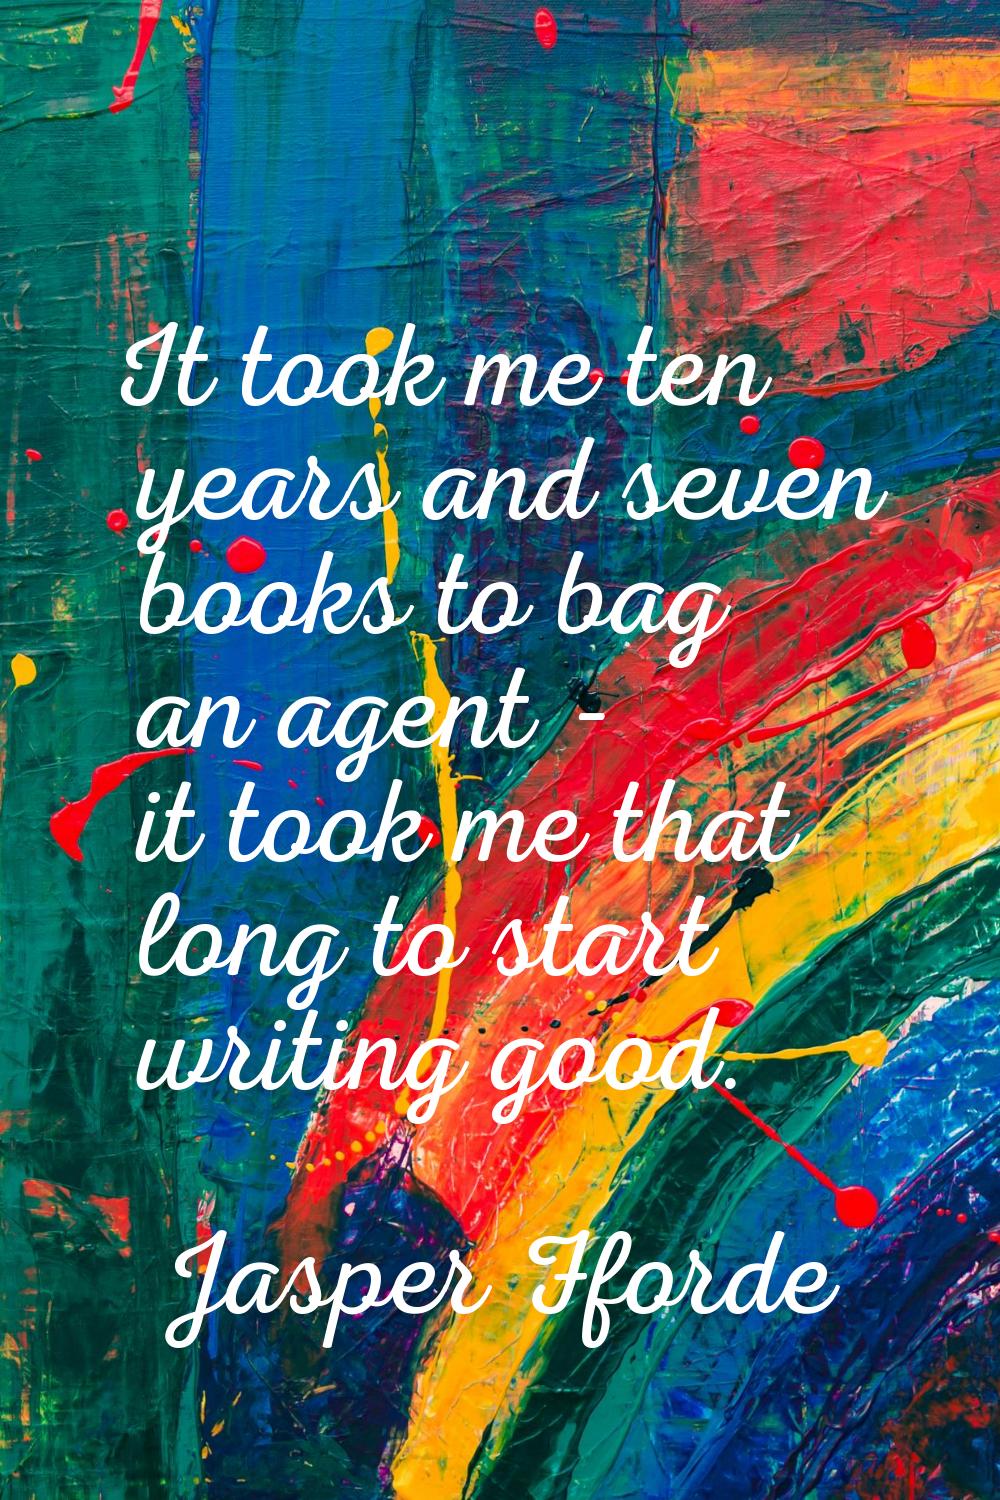 It took me ten years and seven books to bag an agent - it took me that long to start writing good.